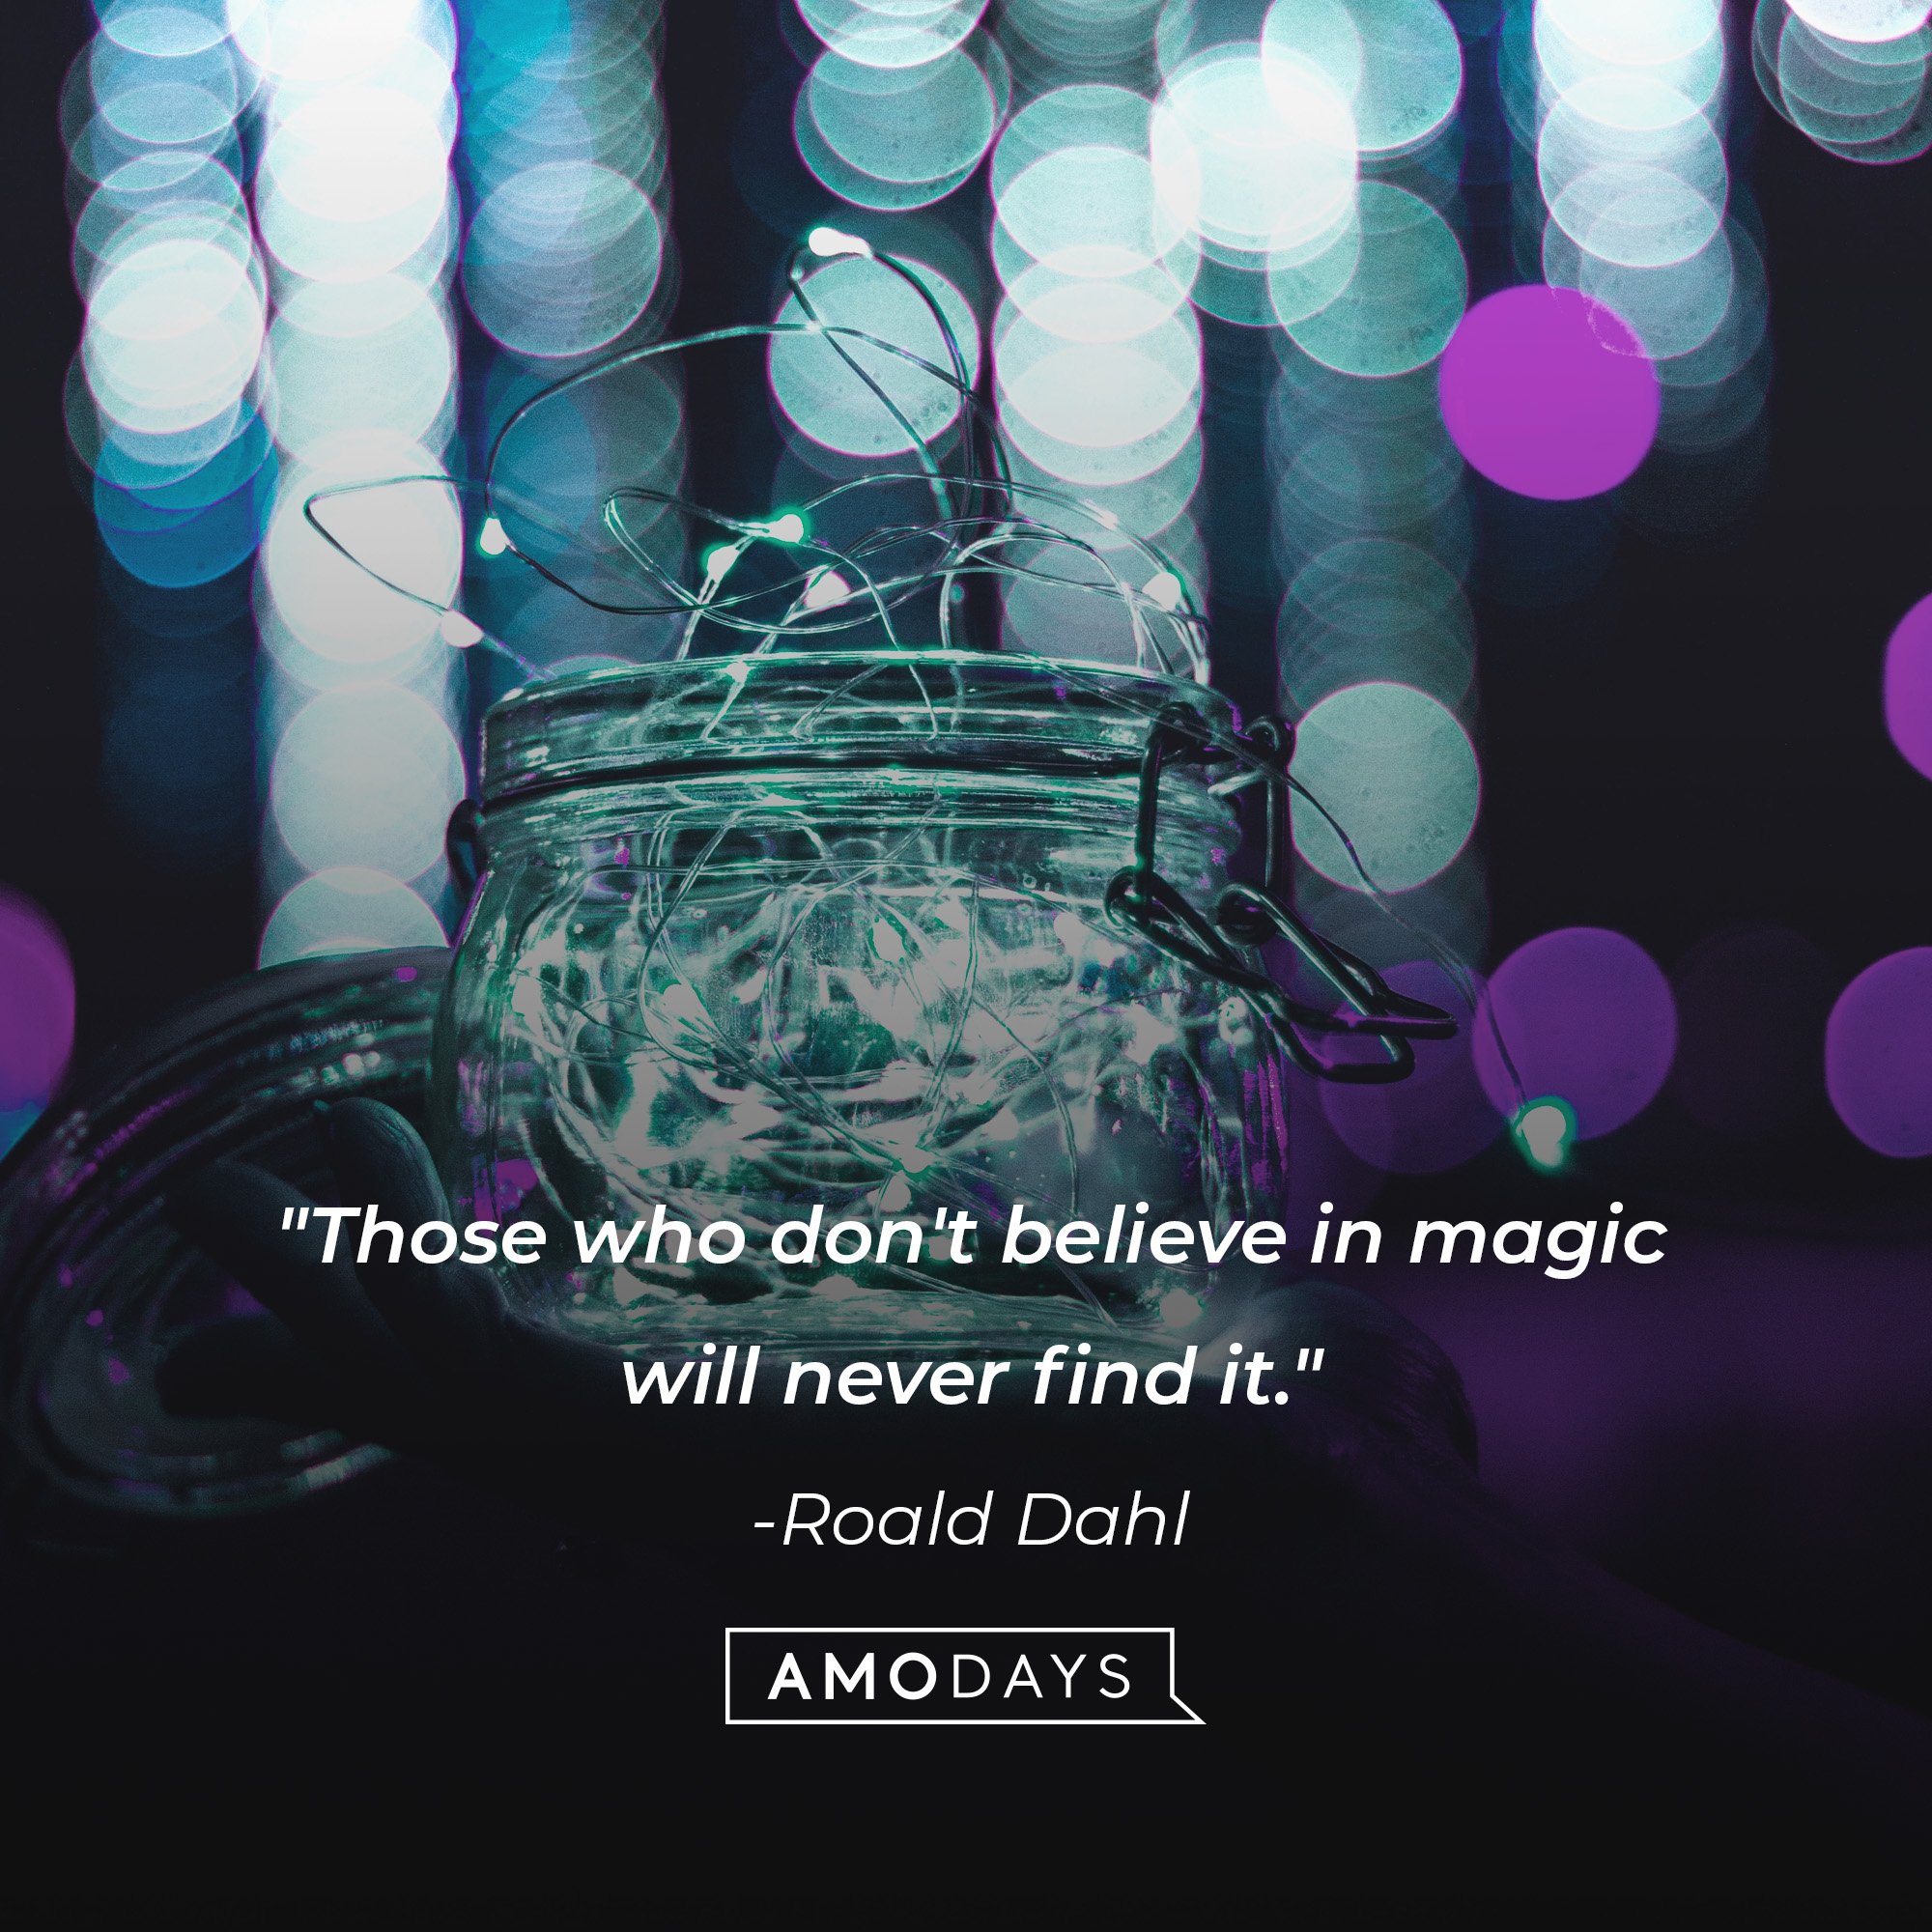 Roald Dahl’s quote: "Those who don't believe in magic will never find it." | Image: AmoDays